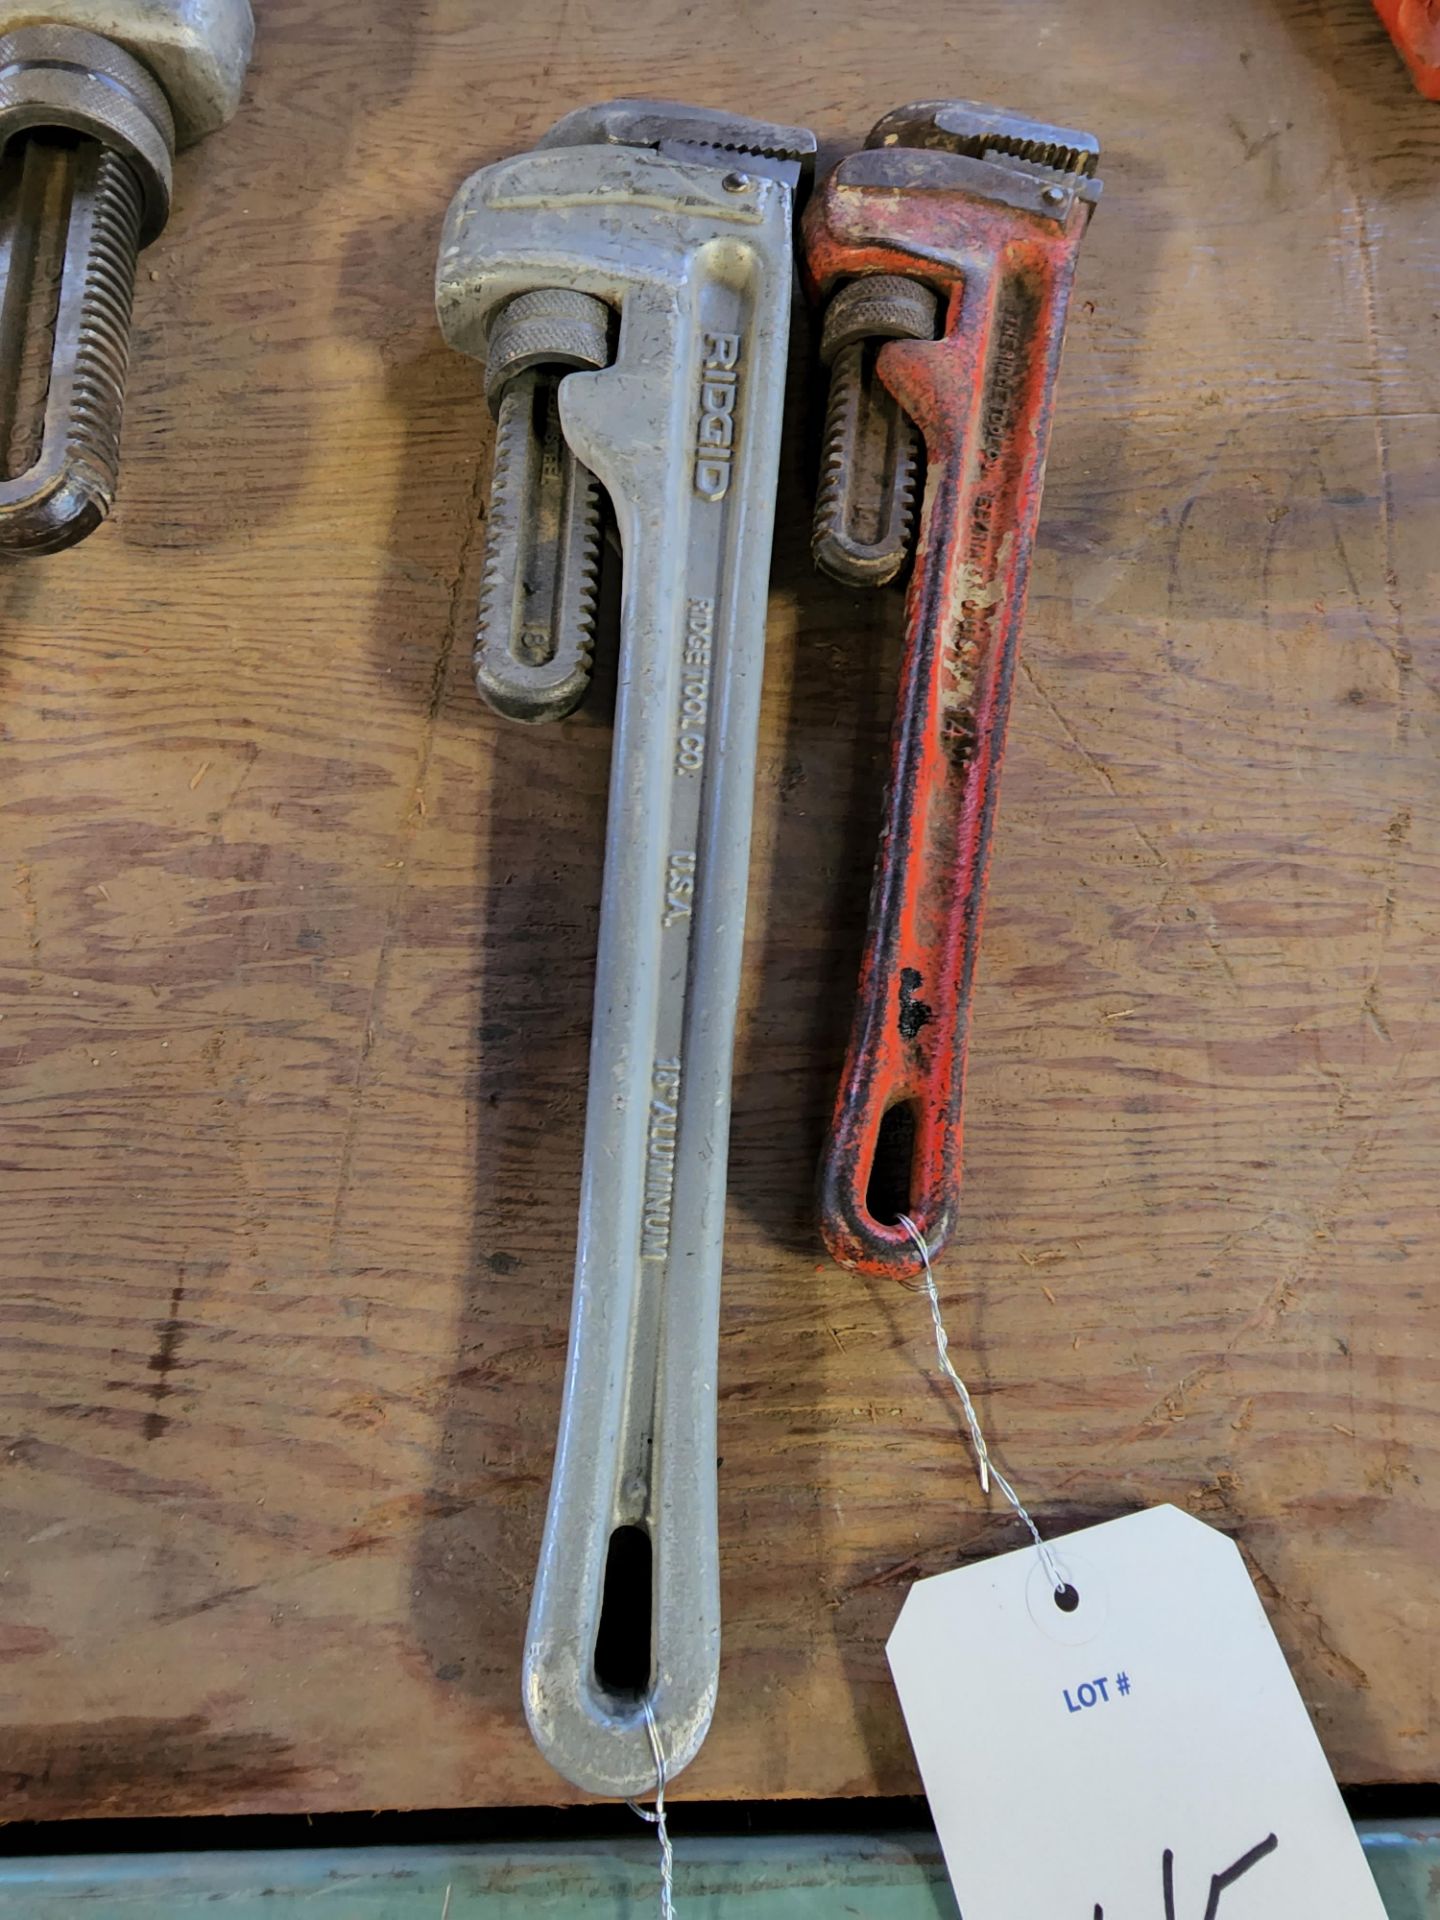 2 Ridgid Pipe Wrenches